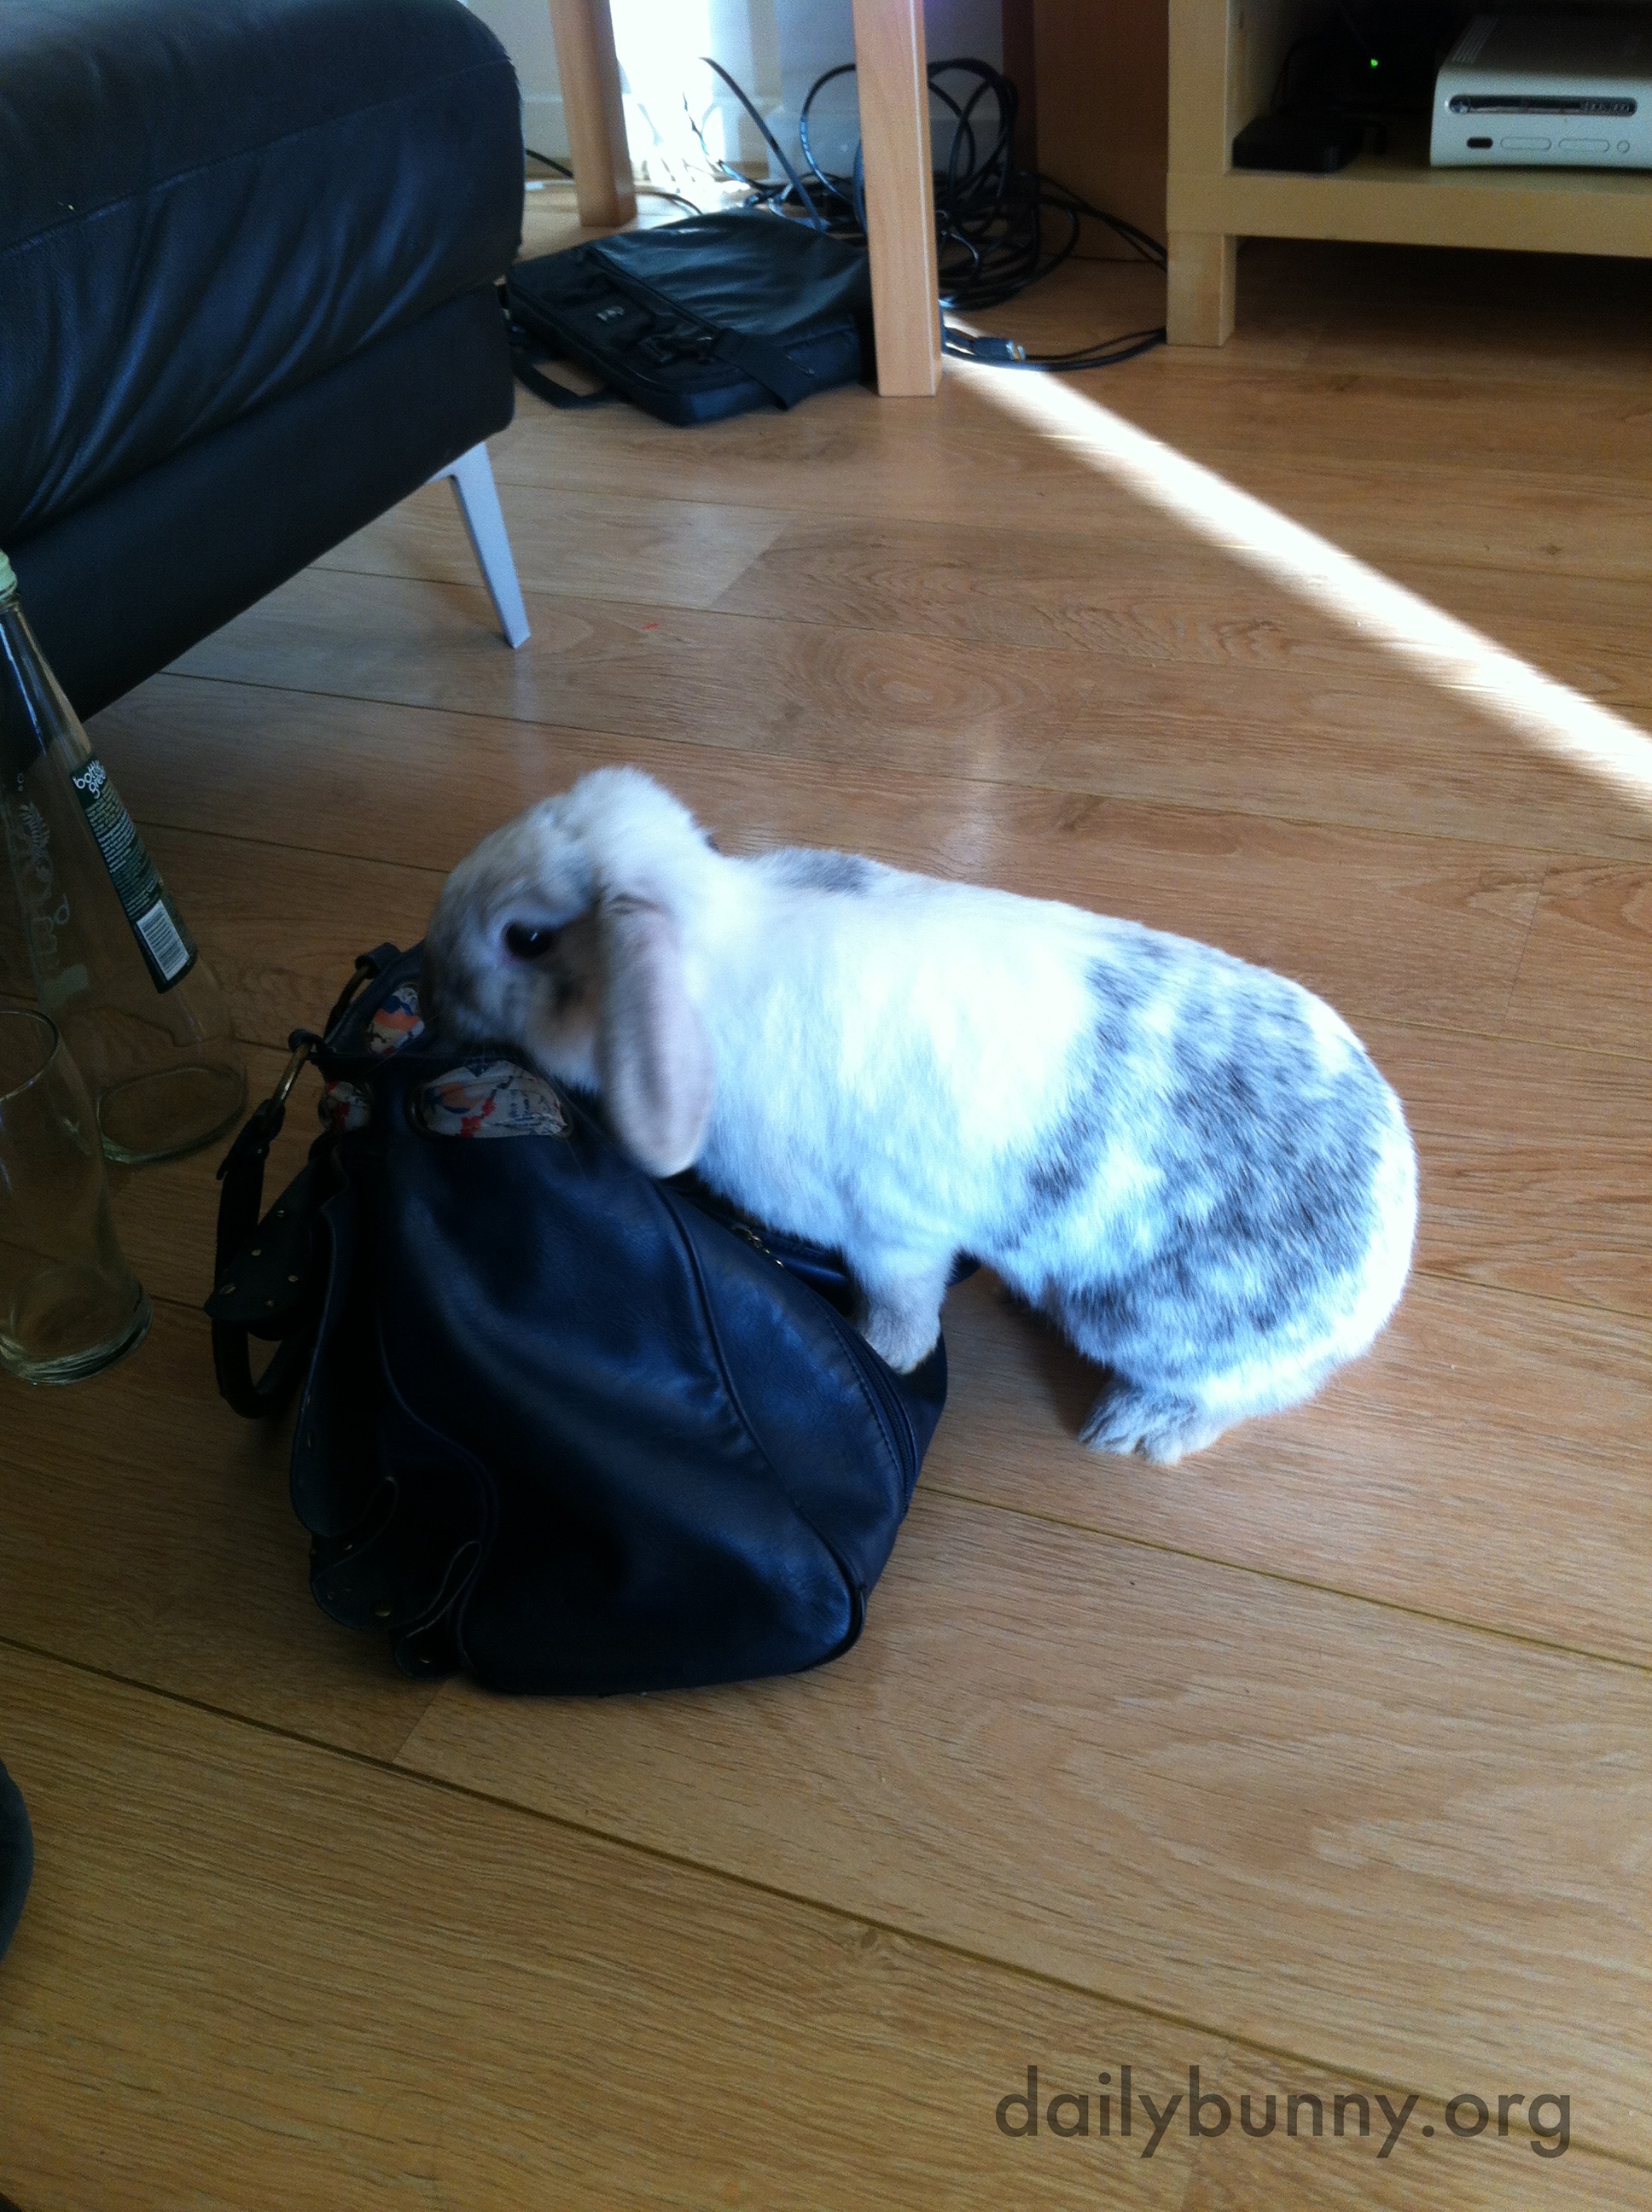 Bunny Plans to Stow Away in His Human's Bag for a Trip to the Grocery Store